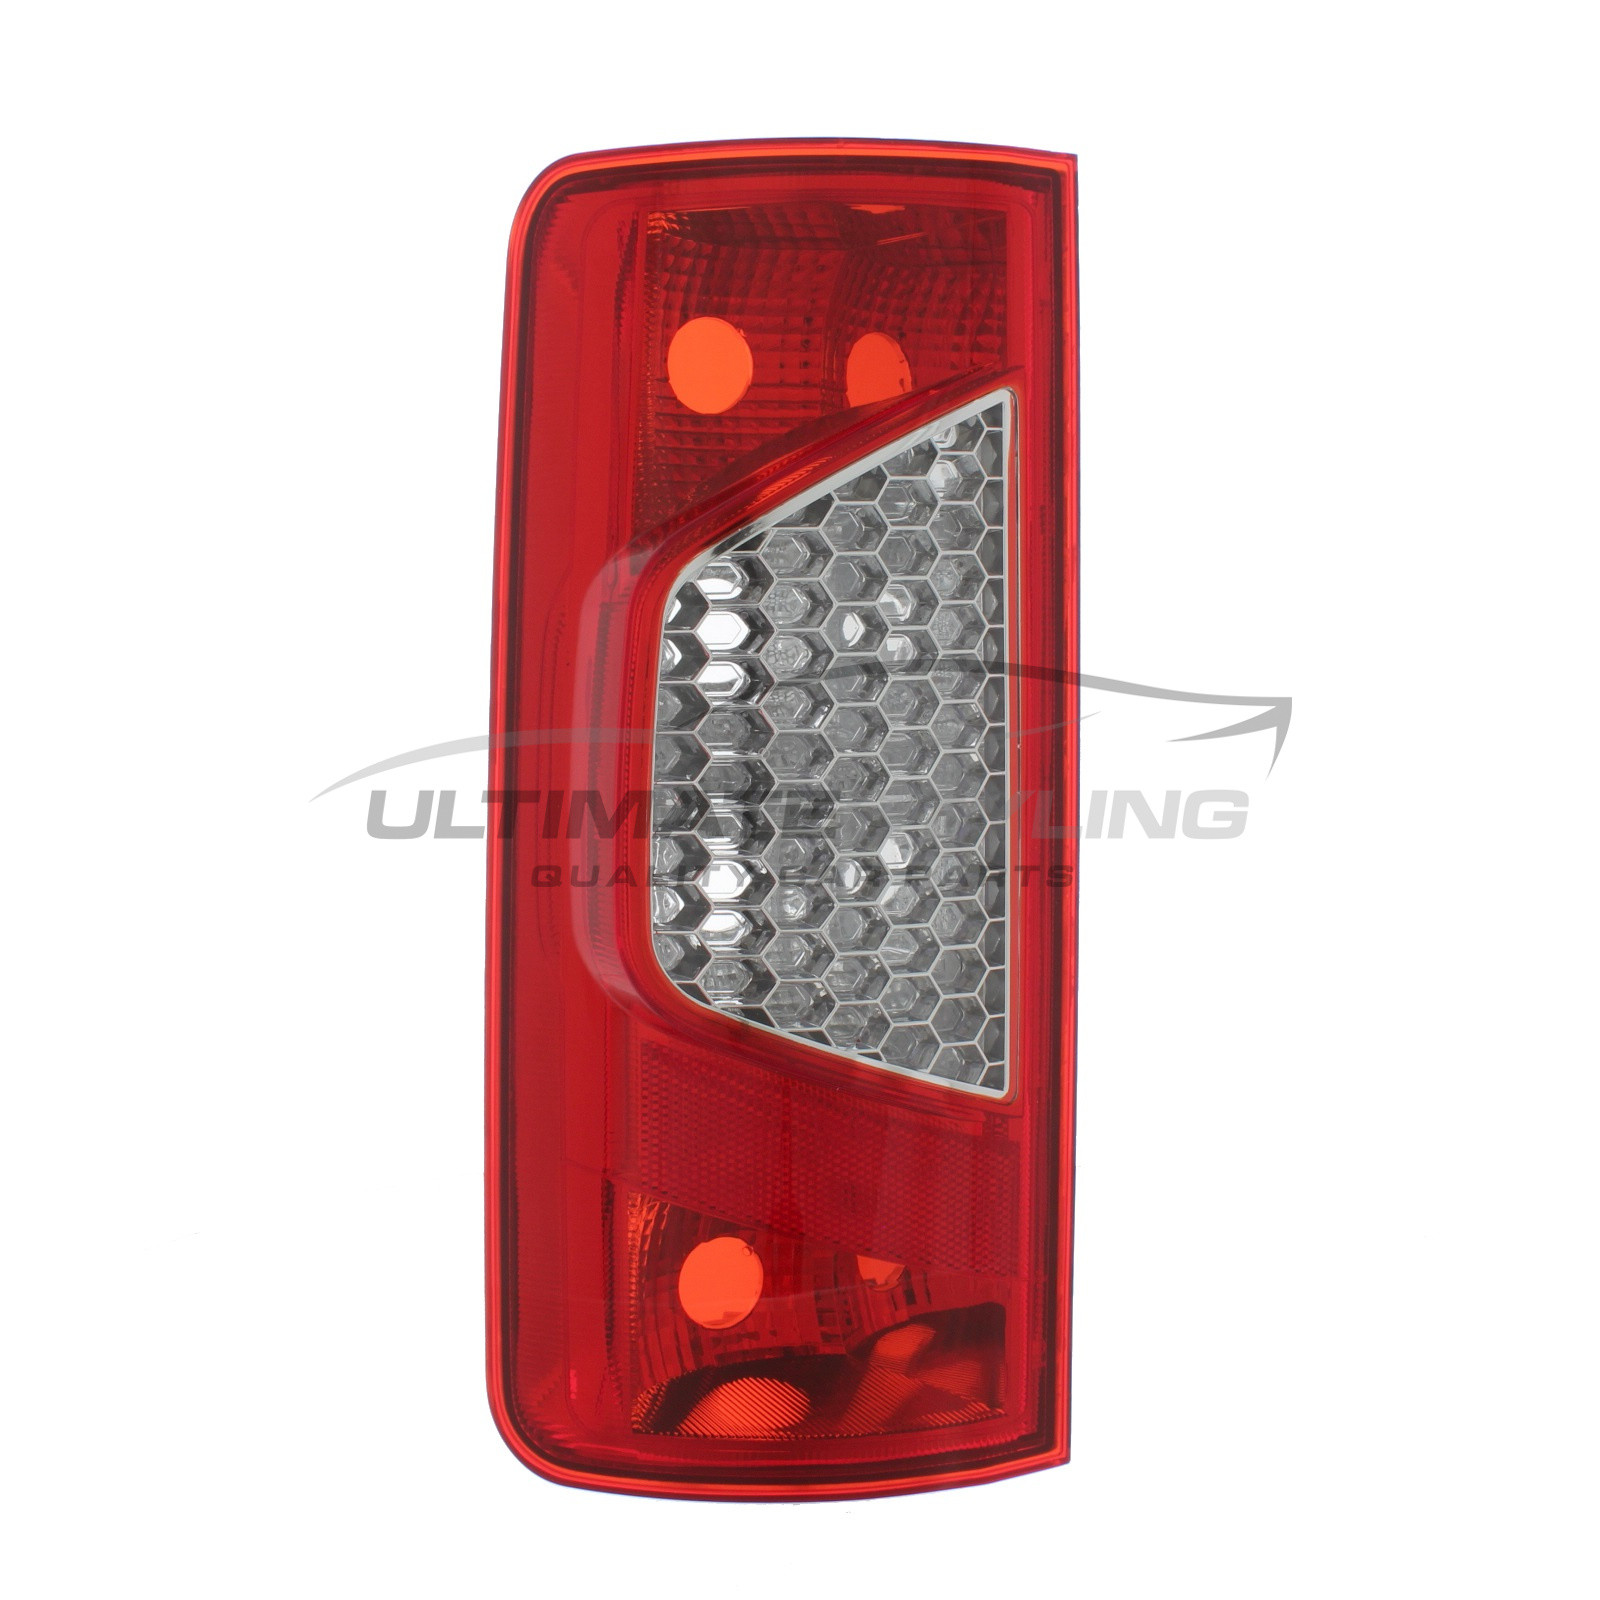 Ford Tourneo Connect / Transit Connect Rear Light / Tail Light - Passenger Side (LH), Rear - Non-LED